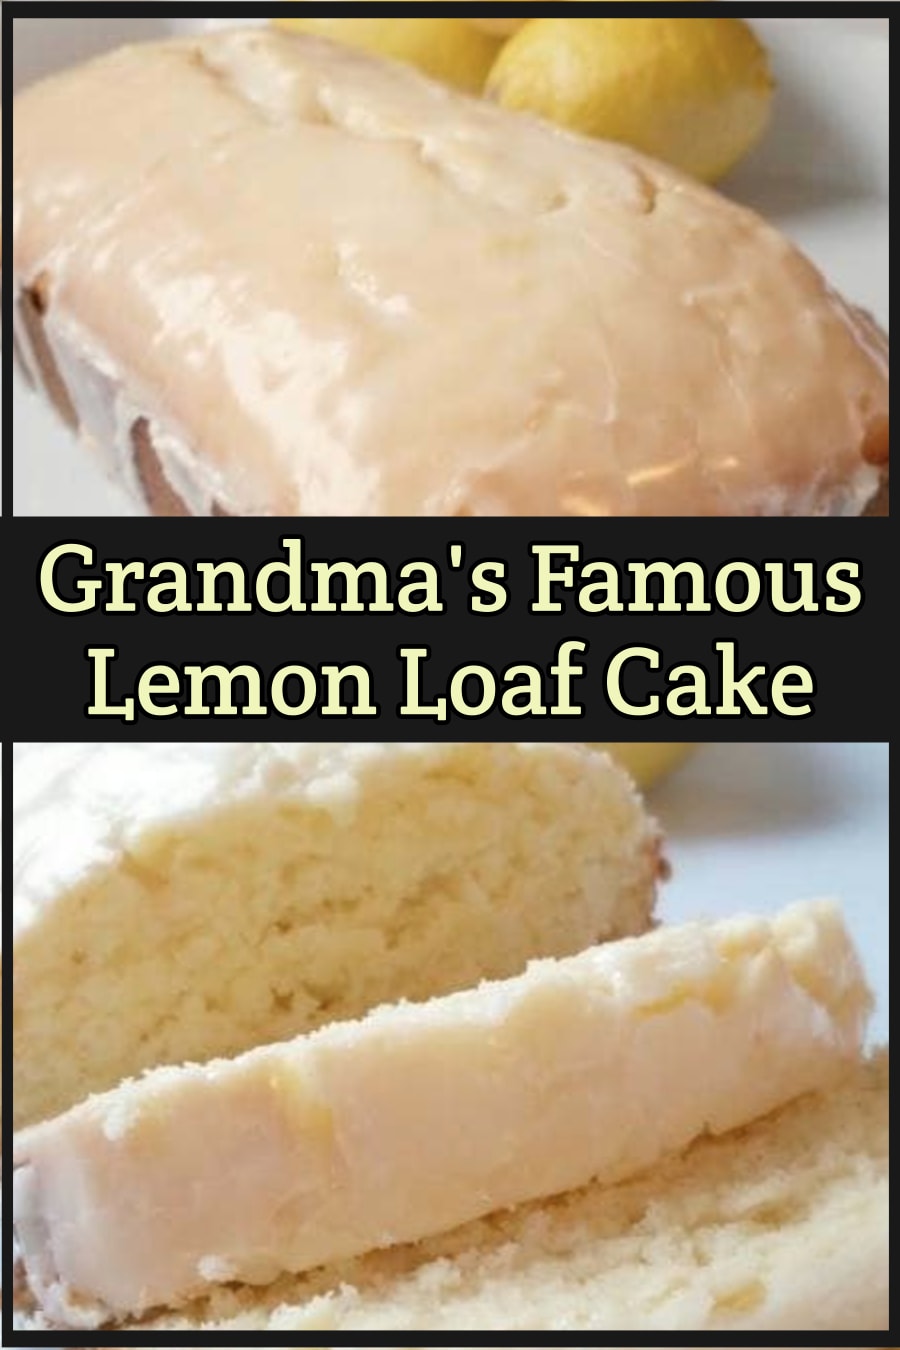 Lemon Dessert Recipes! This is grandma's famous lemon loaf cake recipe with a lemon frosting glaze. Perfect for holiday dessert, family gatherings, block parties -  Crowd pleaser brunch food idea too!